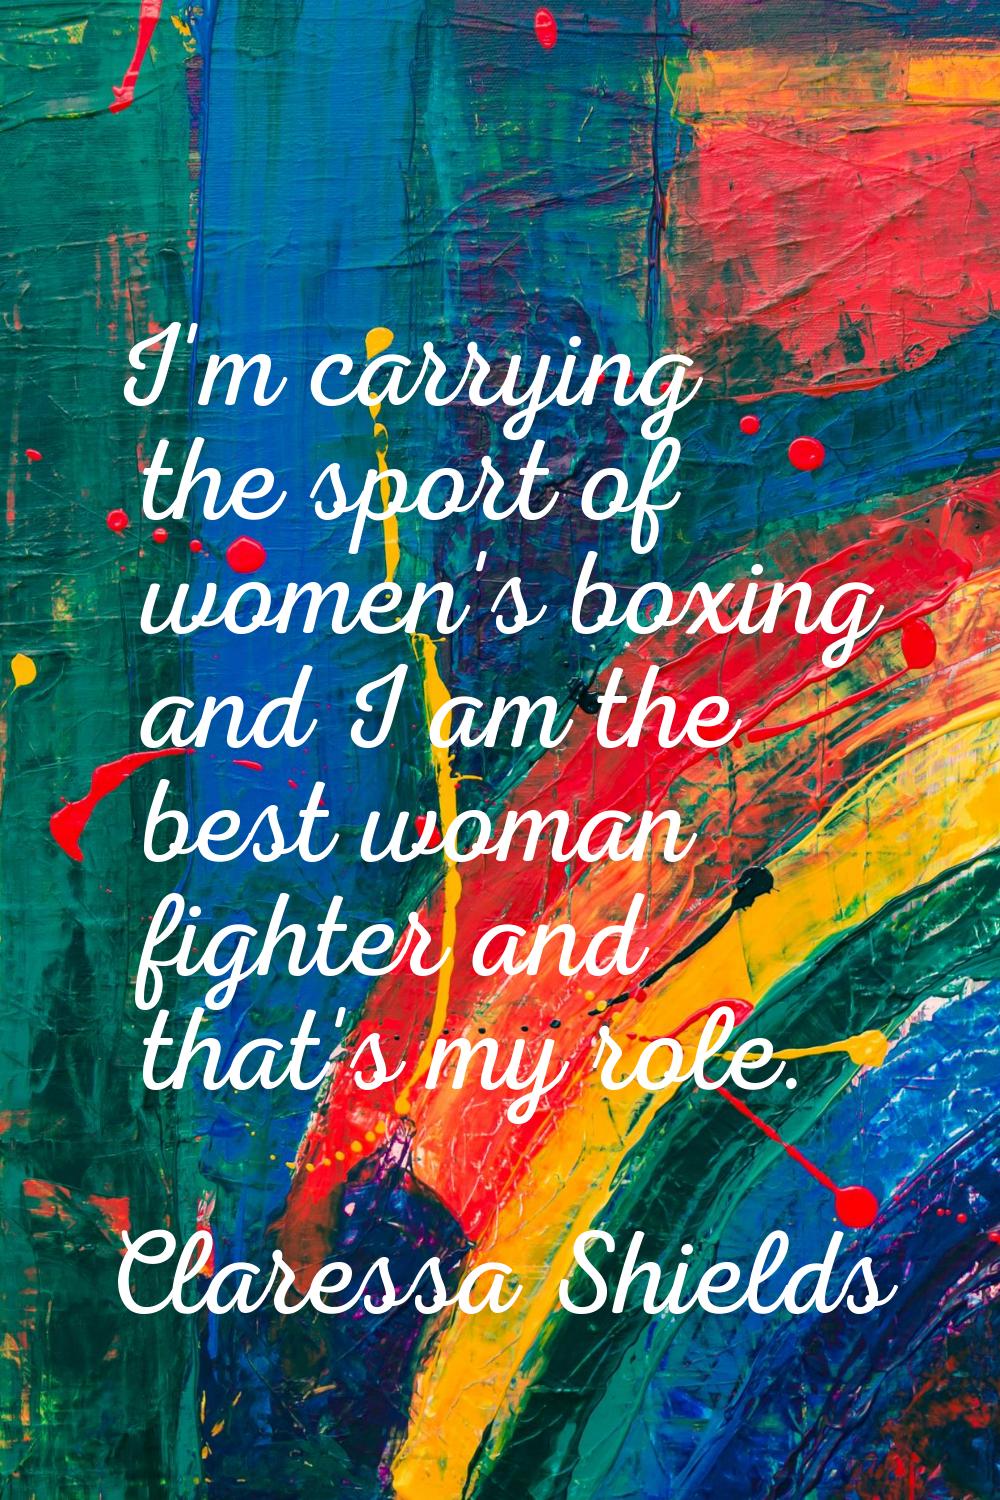 I'm carrying the sport of women's boxing and I am the best woman fighter and that's my role.